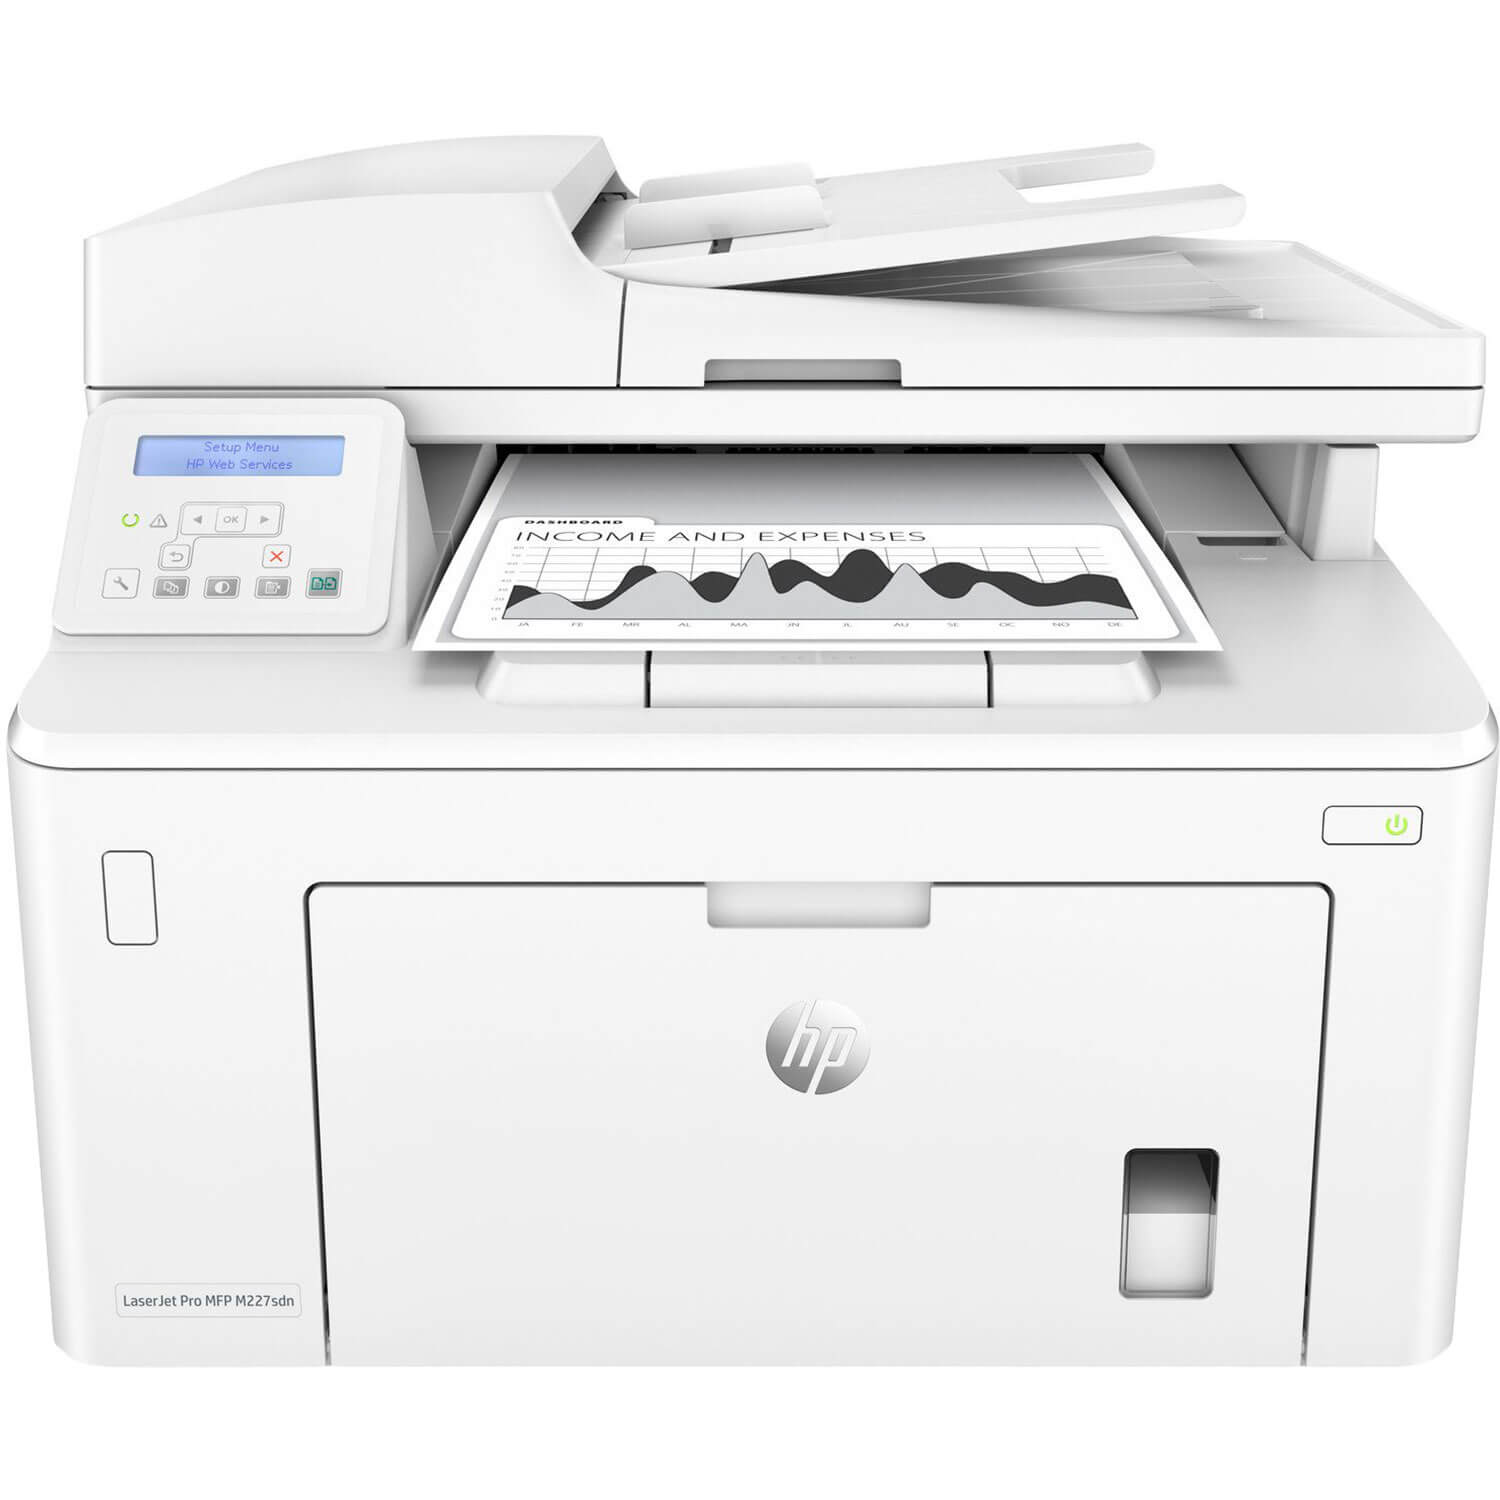  Multifunctional laser monocrom HP Pro MFP M227sdn, A4 